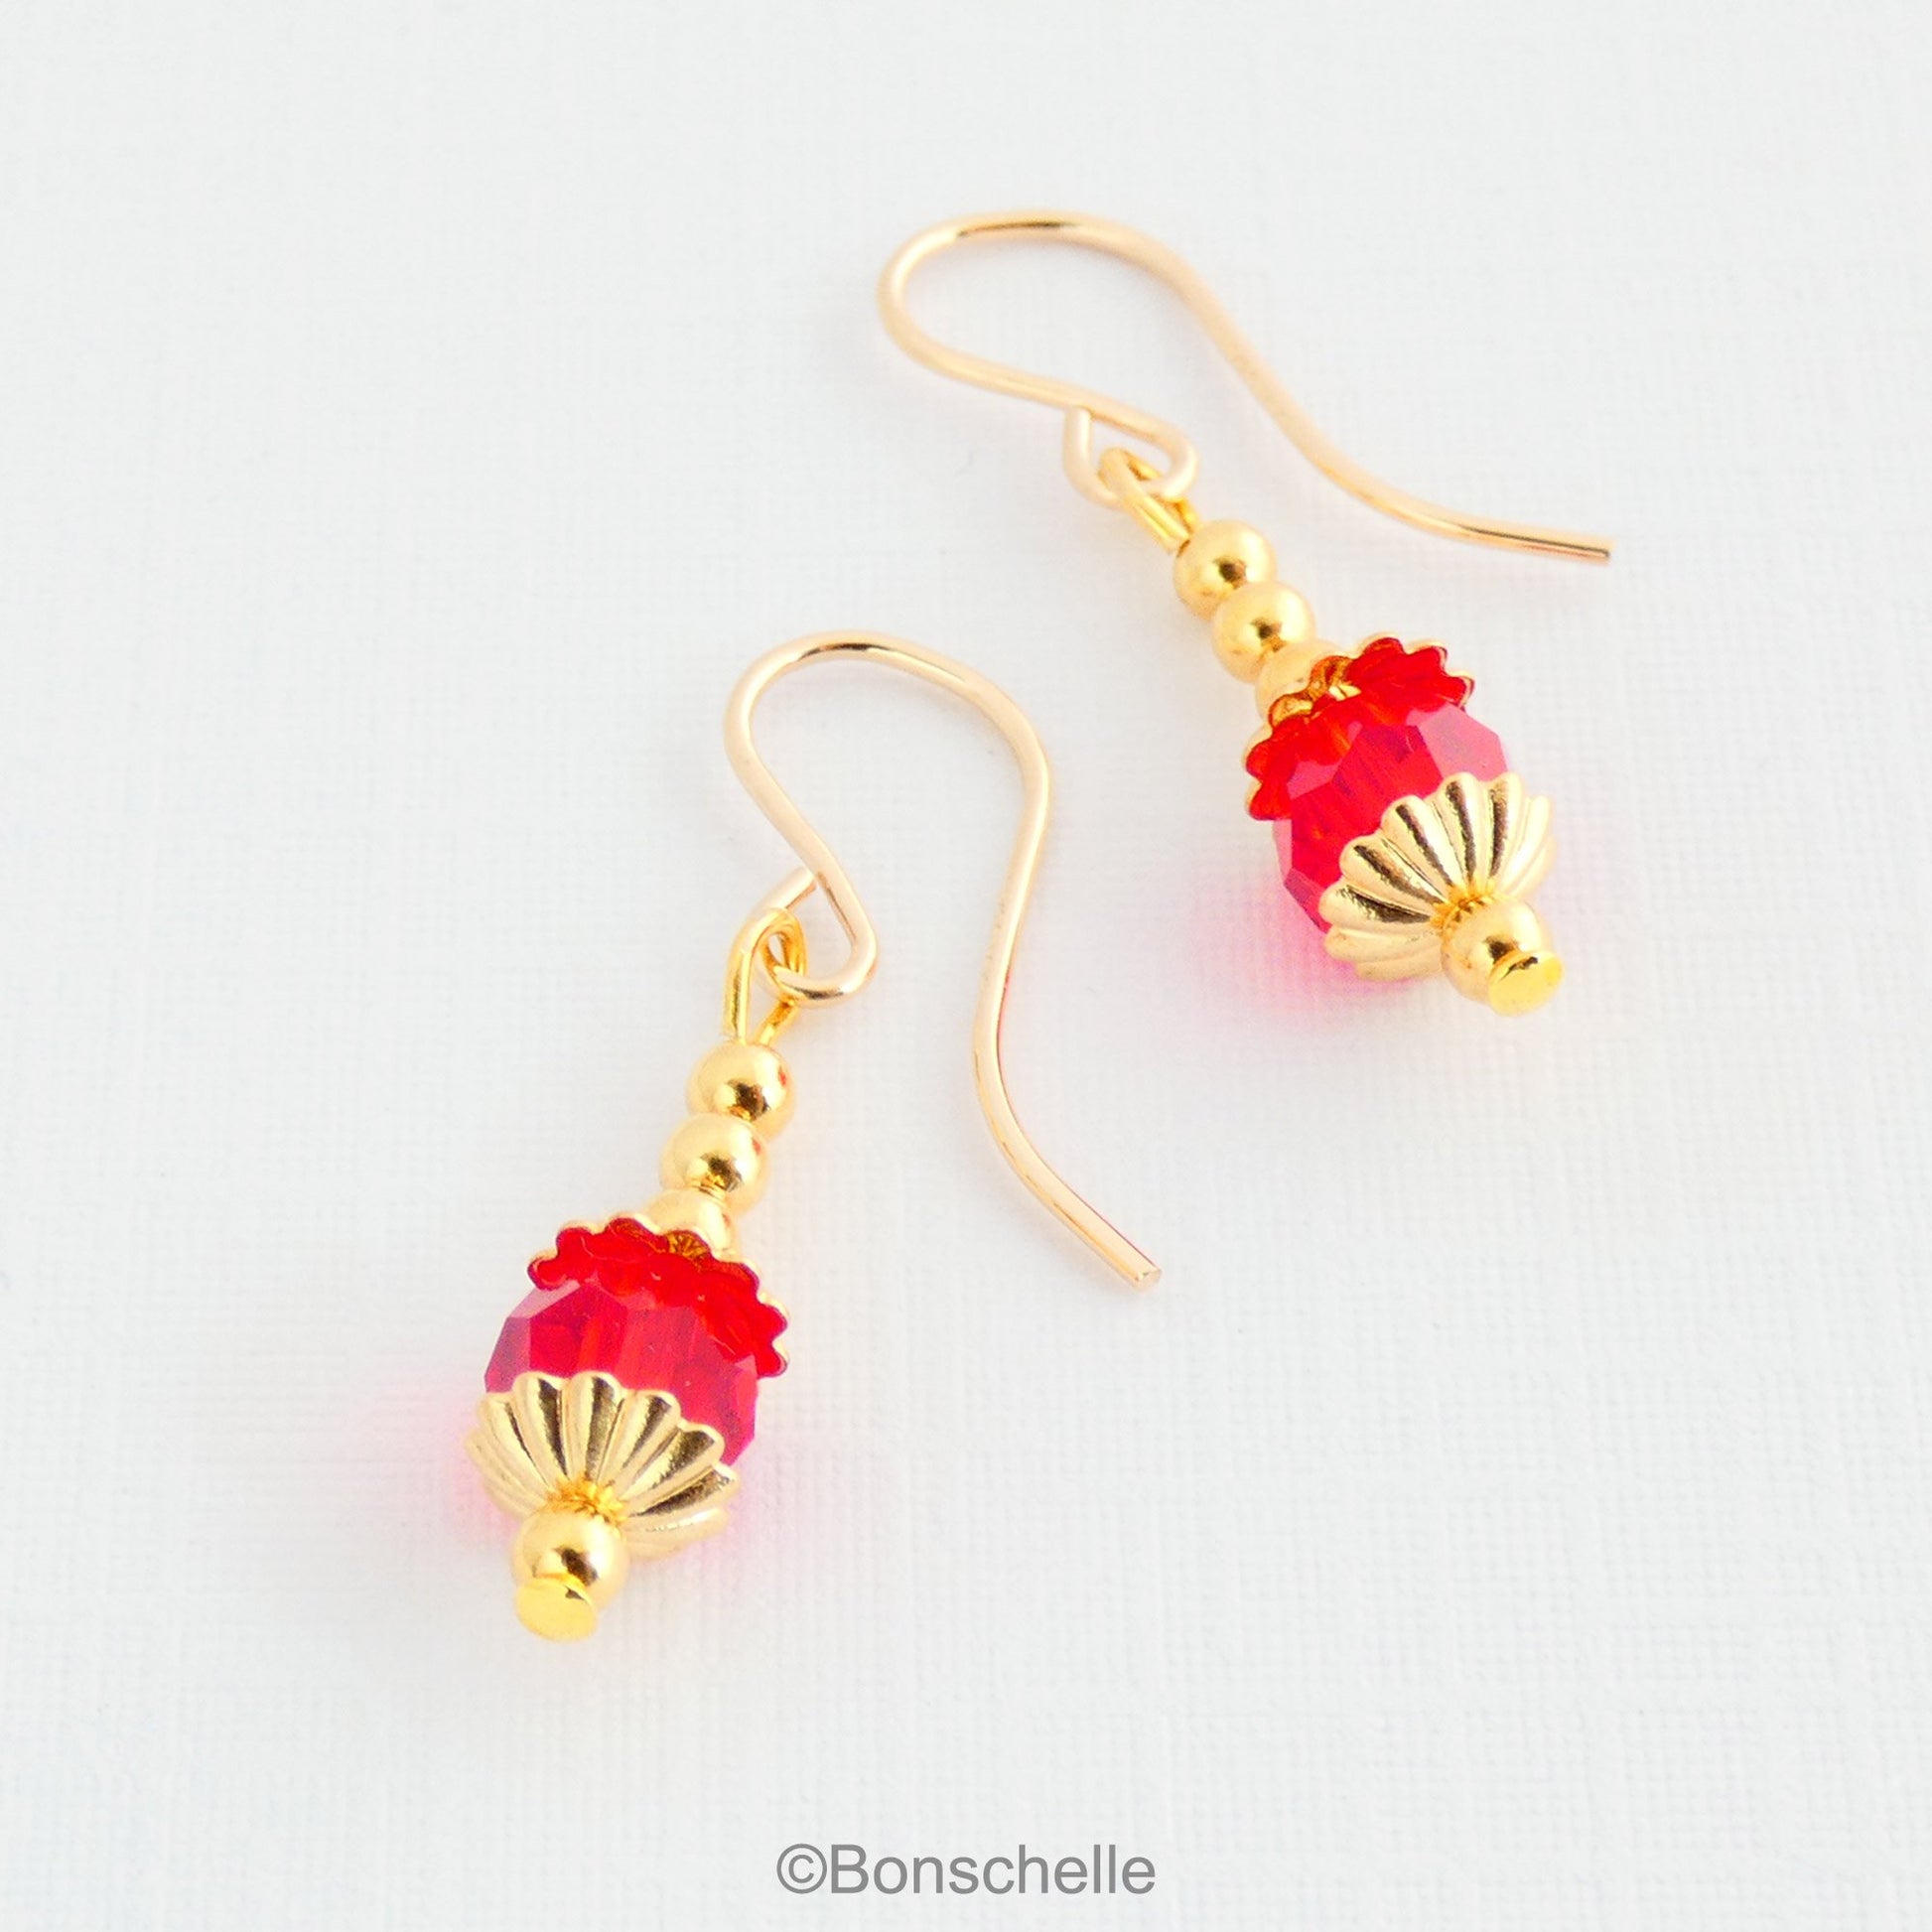 Drop earrings with a single bright red Swarovksi crystal beads, 3 smaller gold toned metal beads and 14K gold filled earwires.